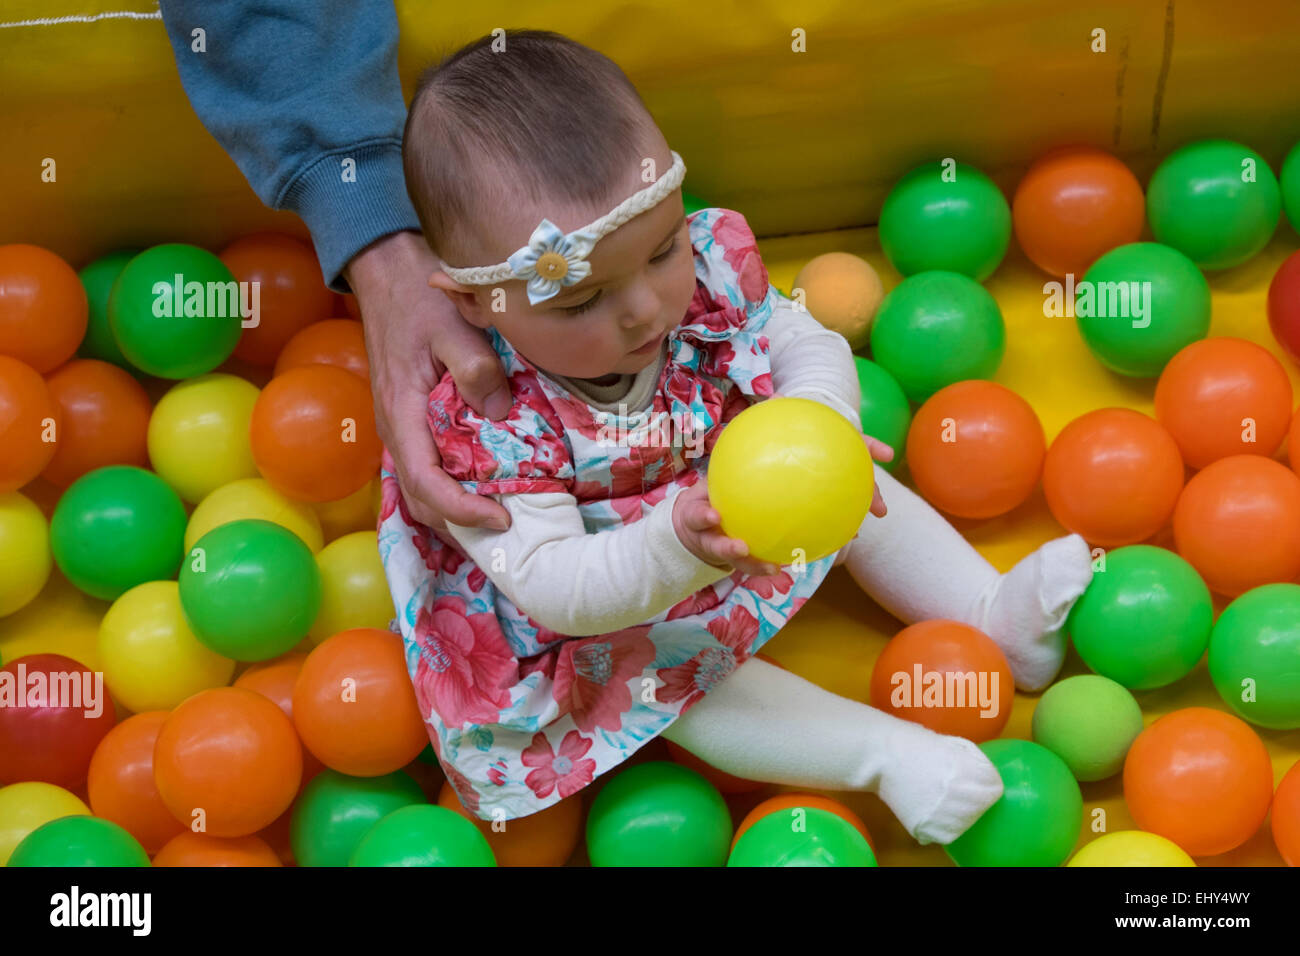 8 month old baby girl, playing with plastic balls Stock Photo